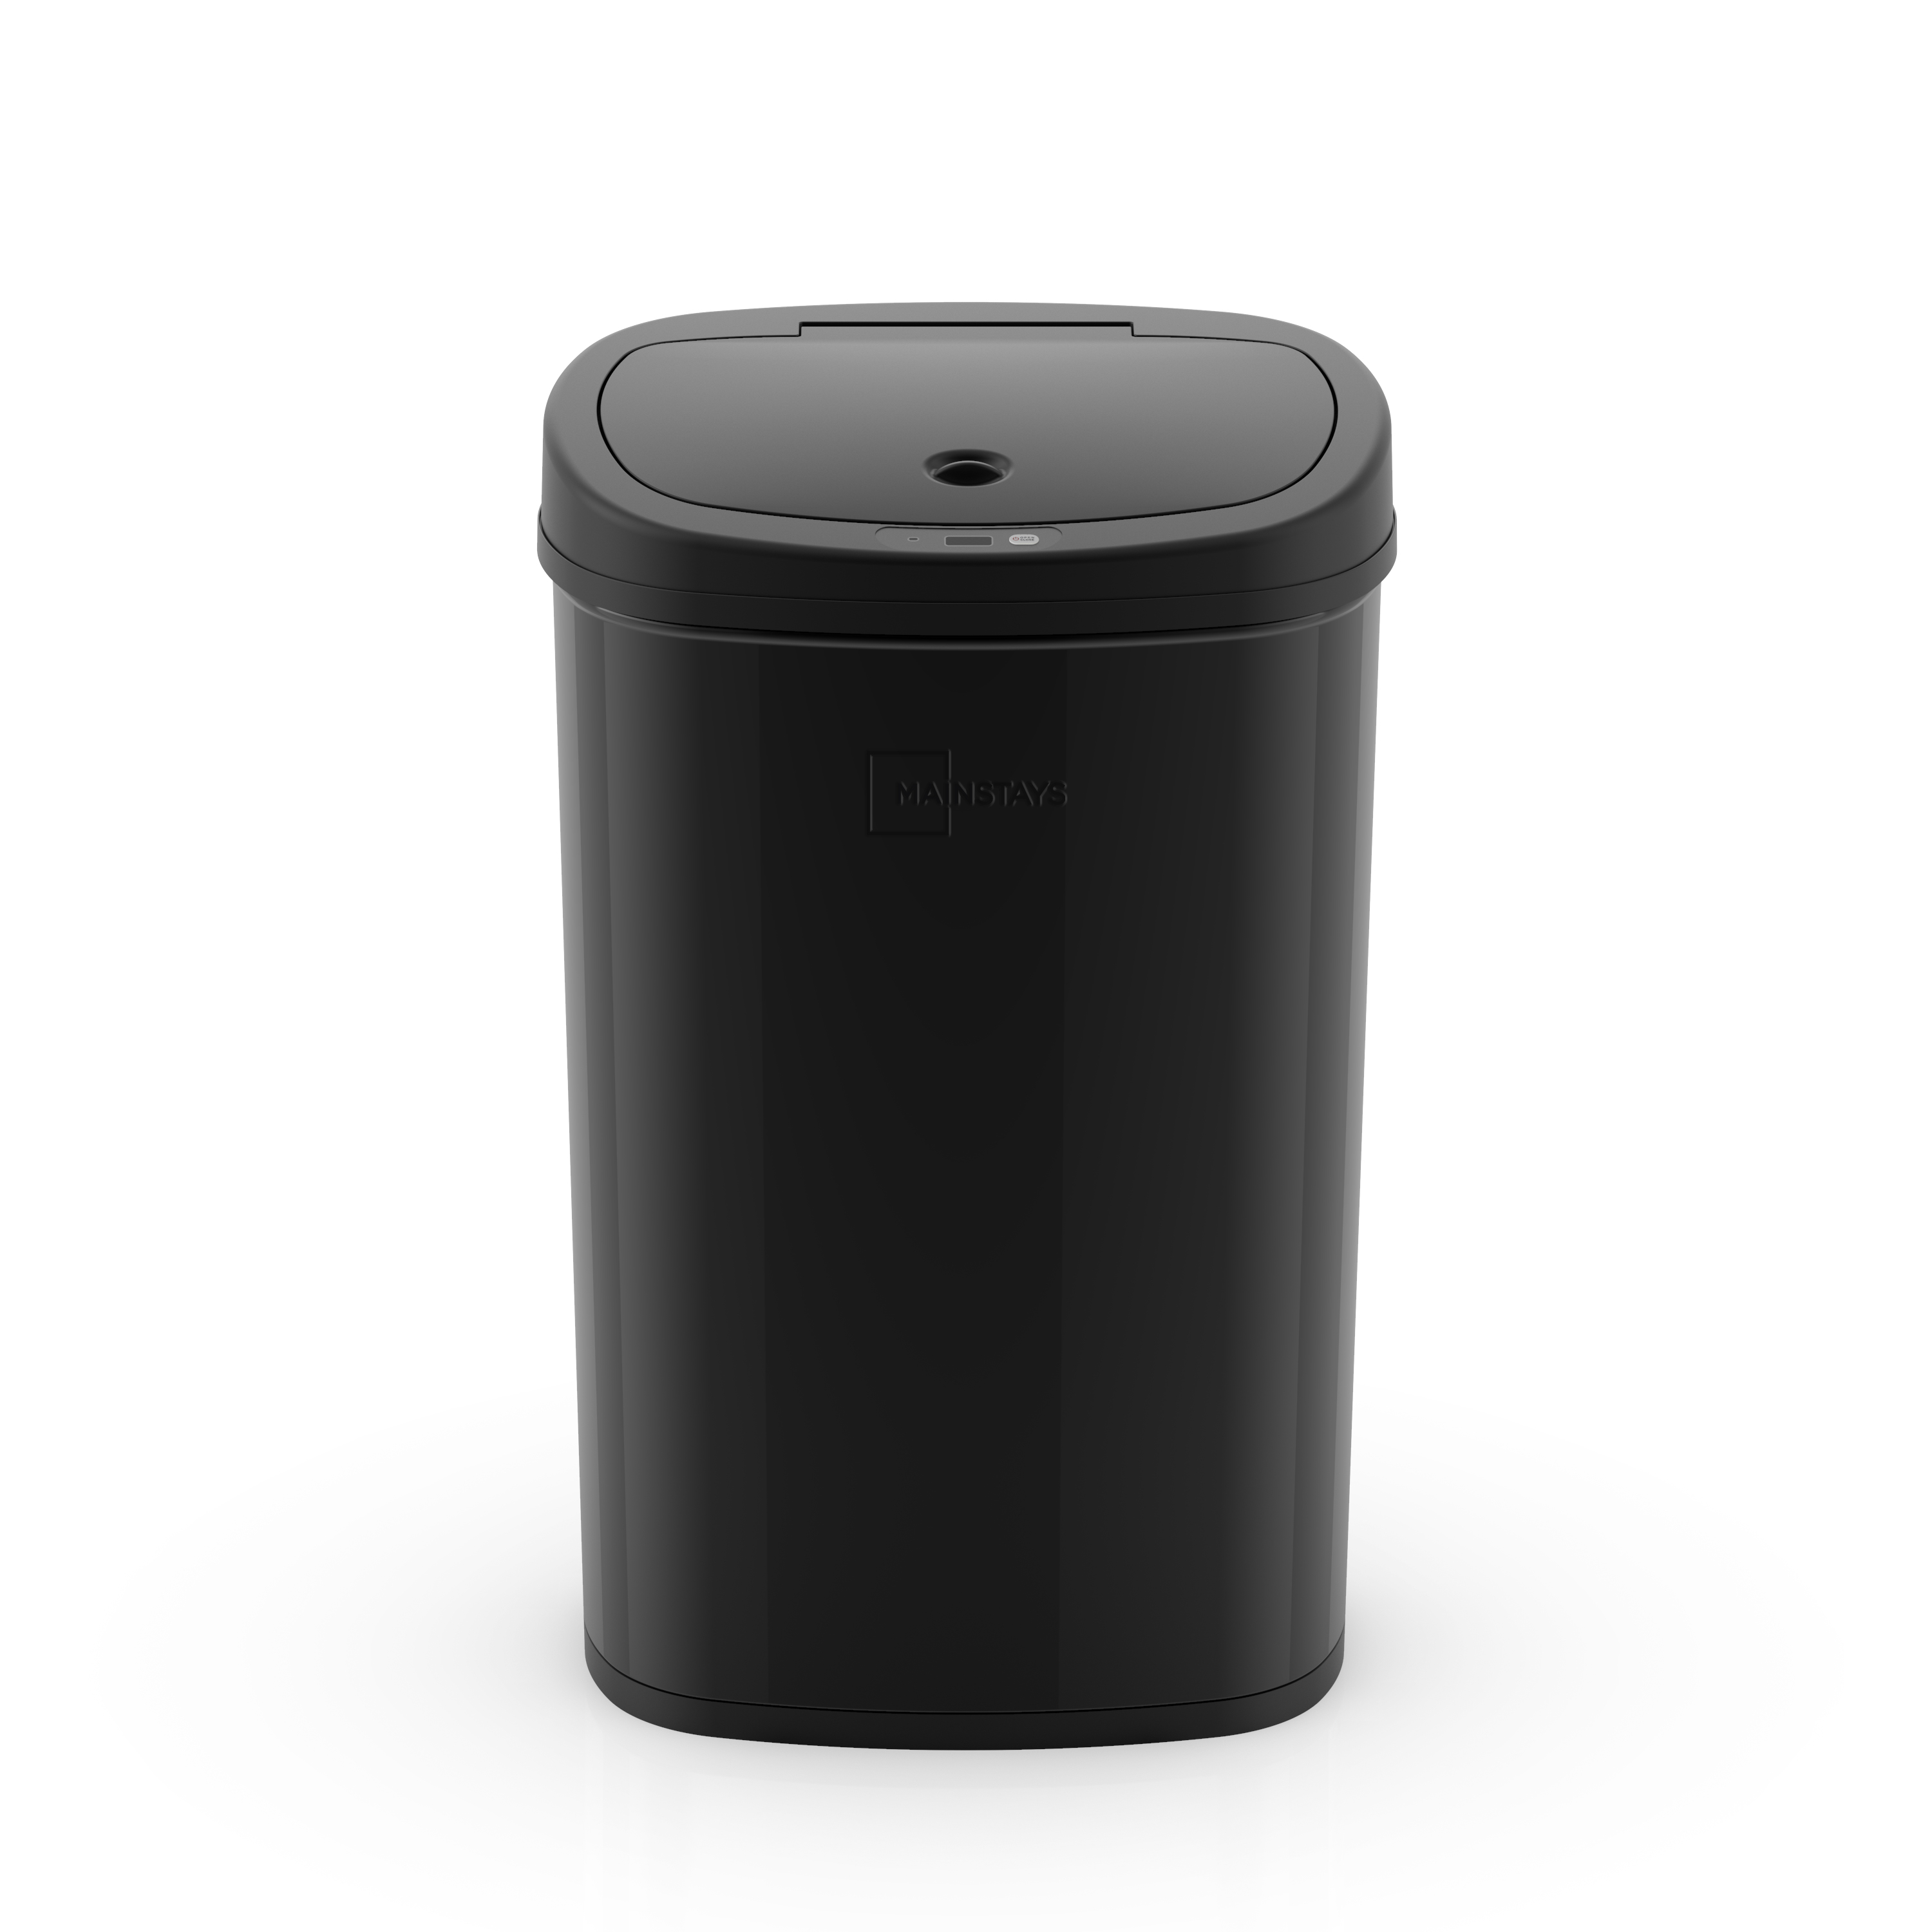 Mainstays 13.2 gal /50 L Motion Sensor Kitchen Garbage Can, Black Stainless Steel - image 5 of 12